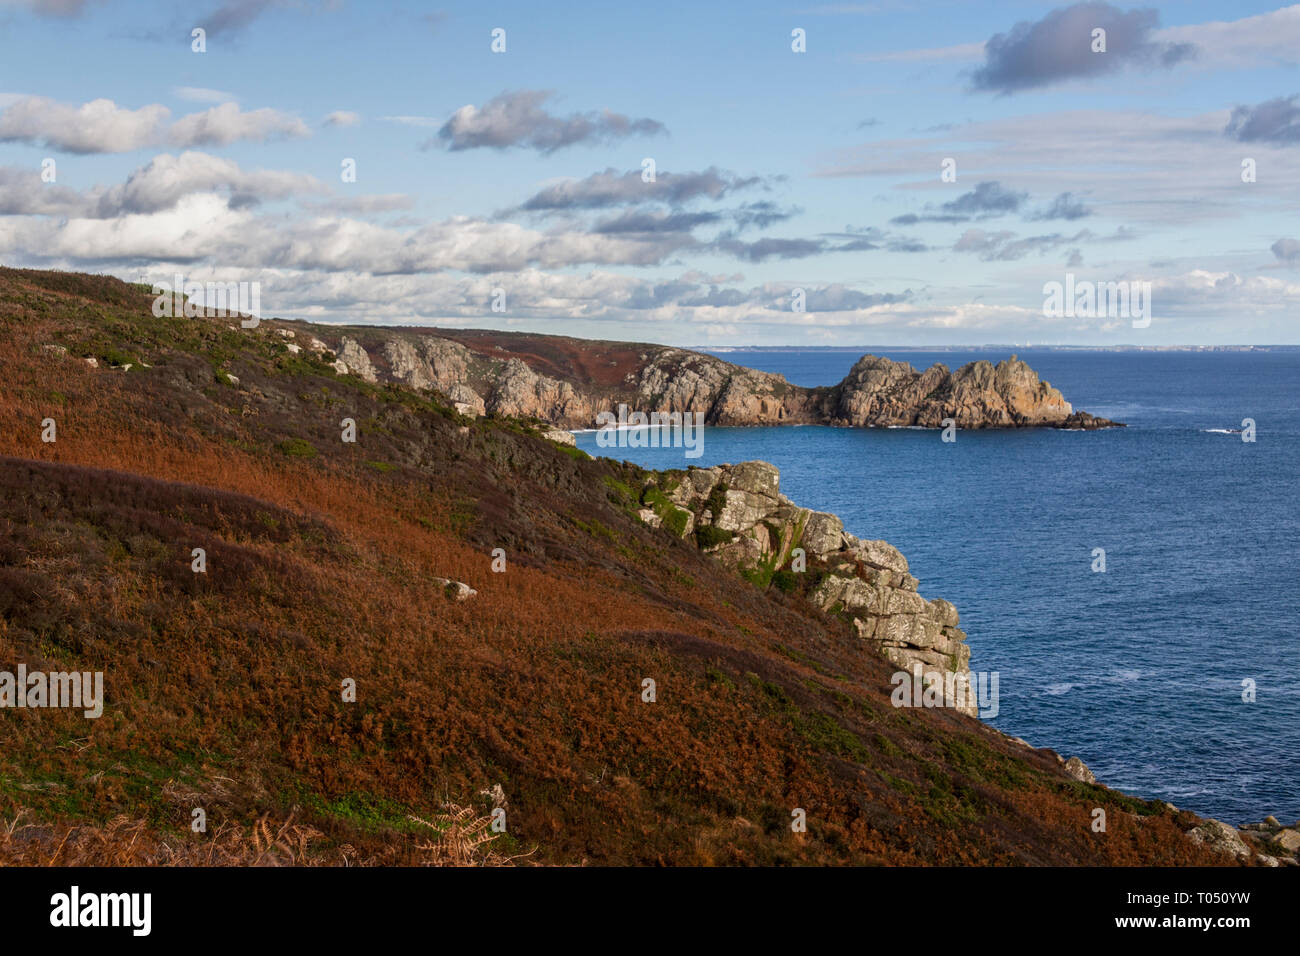 Porthcurno, littoral, Cornwall, UK Banque D'Images